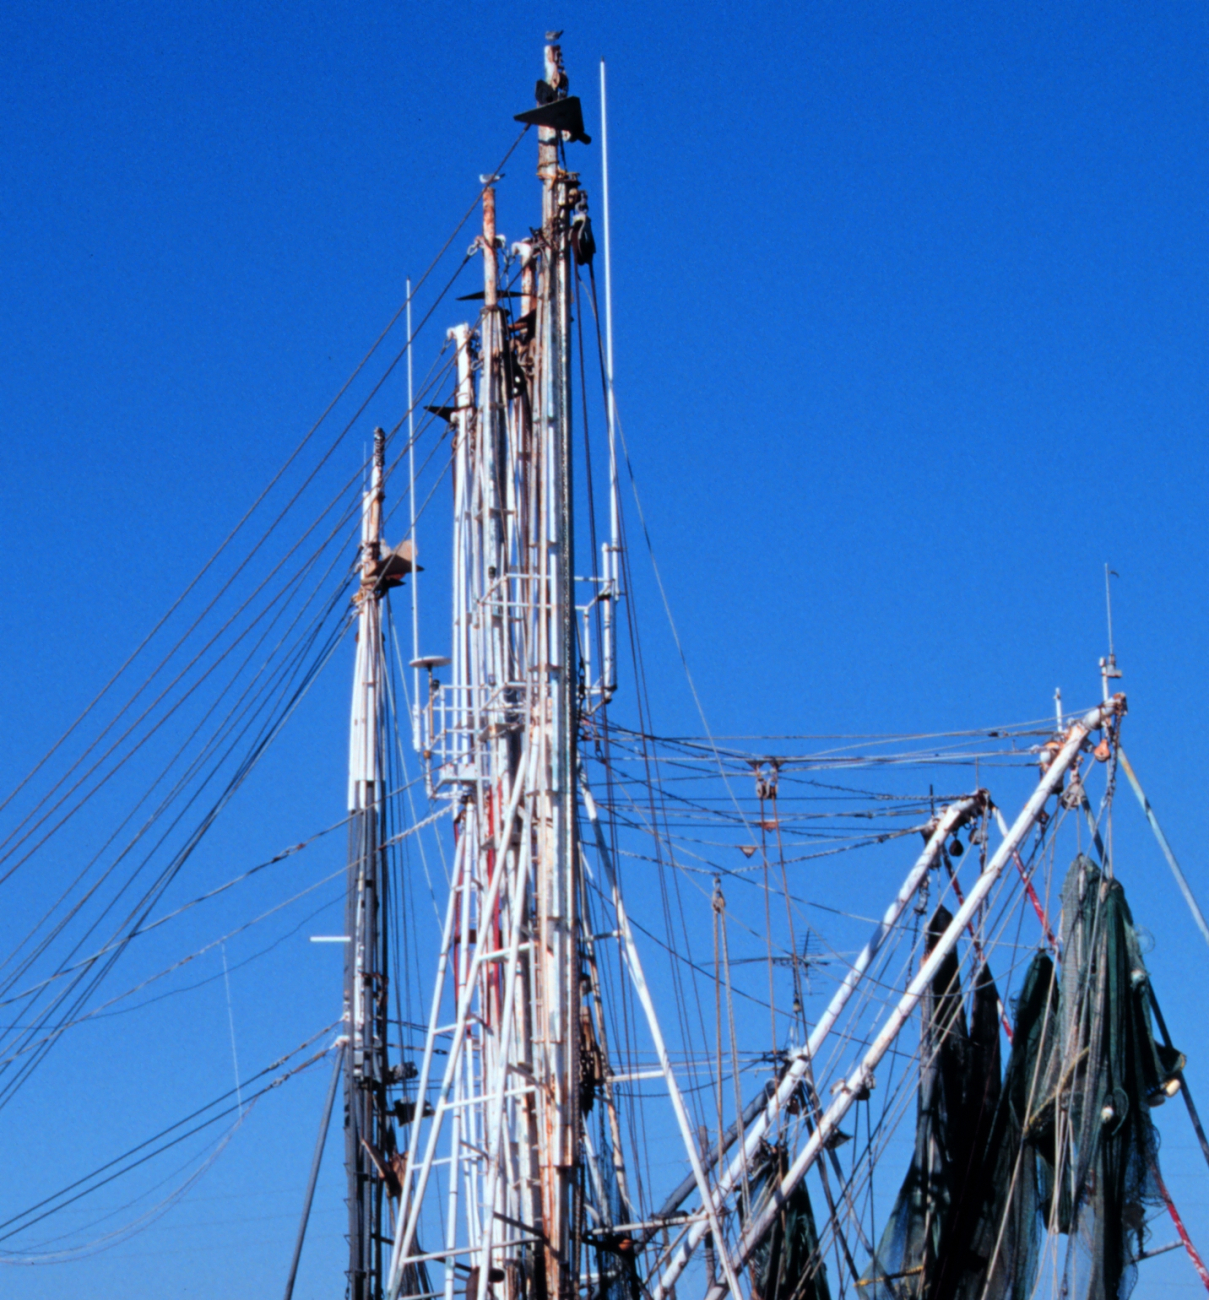 Masts and booms of shrimp boat with nets drying